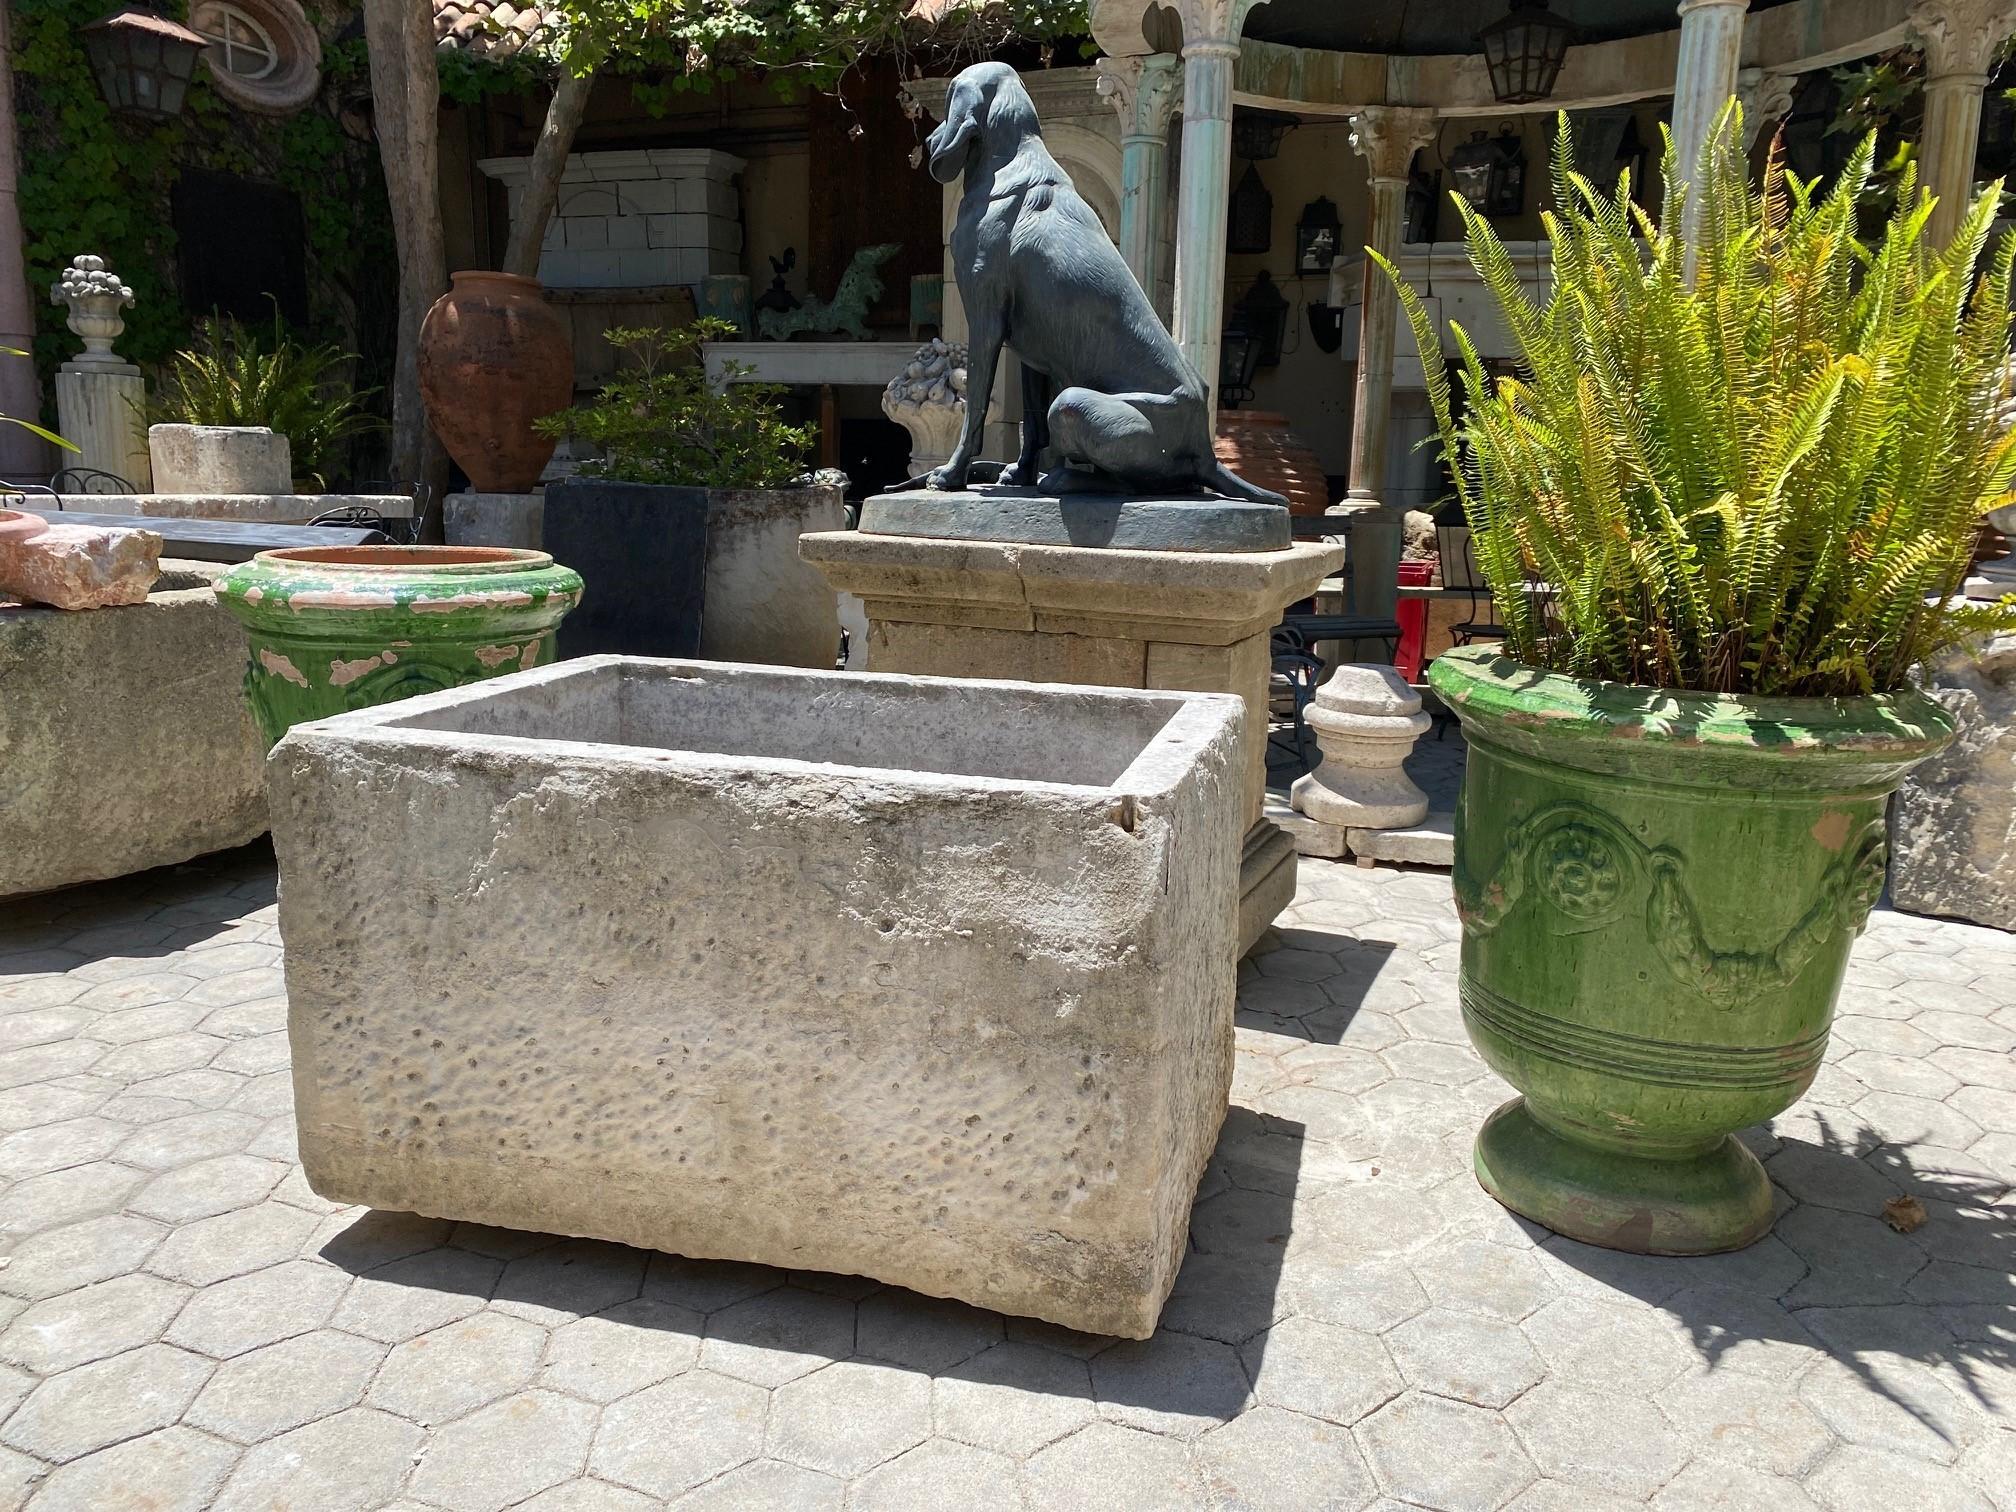 Hand carved stone Container Fountain Basin Tub Planter Firepit Trough antiques. Exquisite late 18th Early 19th century water fountain Basin of hand carved stone. This trough could be installed with a simple bronze spout or a carved stone fountain